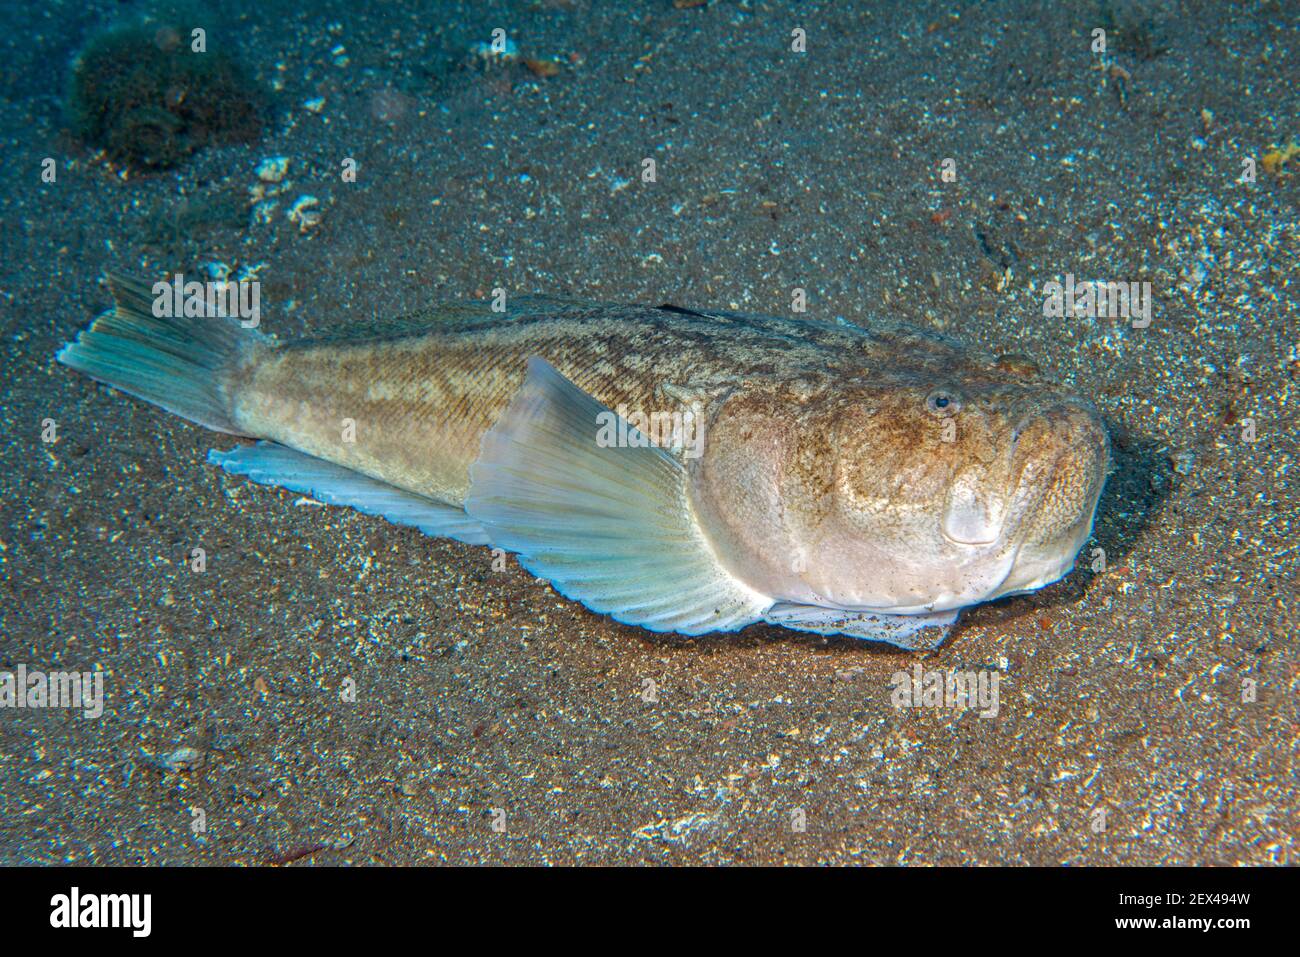 Atlantic stargazer(Uranoscopus scaber). He lives buried in the sand, with only his two eyes and his mouth sticking out of the bottom. Fish of the Cana Stock Photo